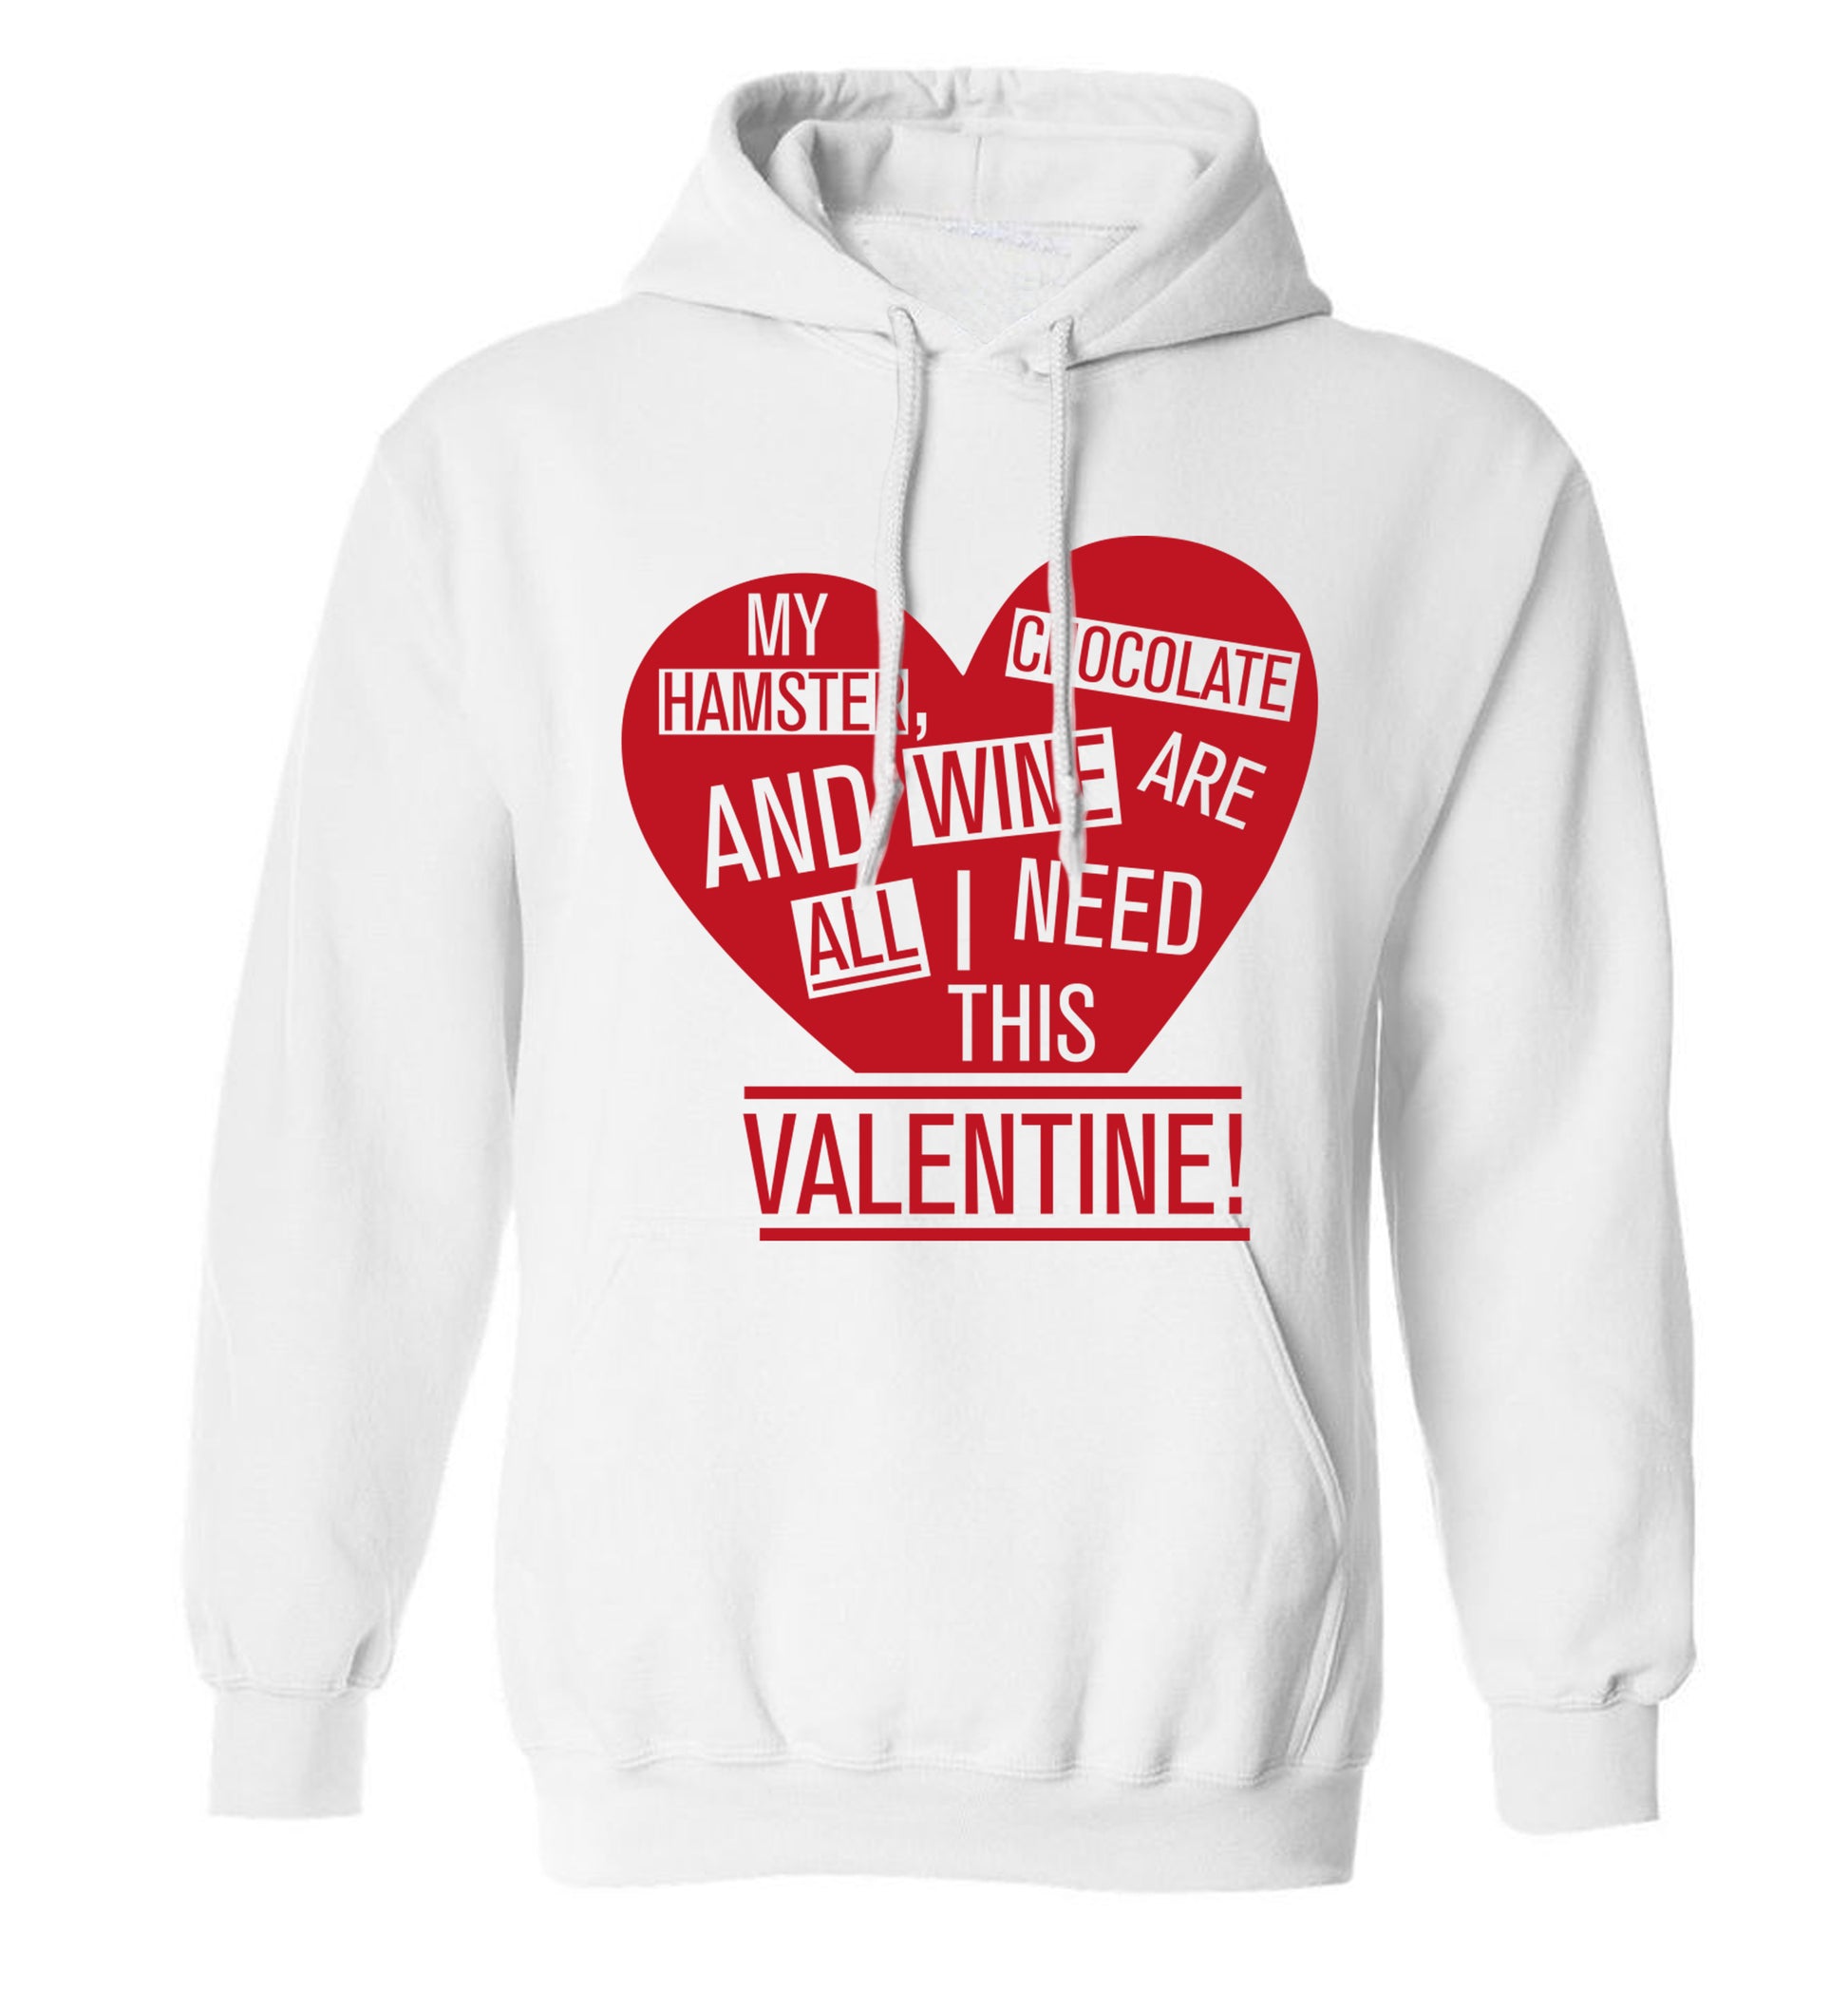 My hamster, chocolate and wine are all I need this valentine! adults unisex white hoodie 2XL